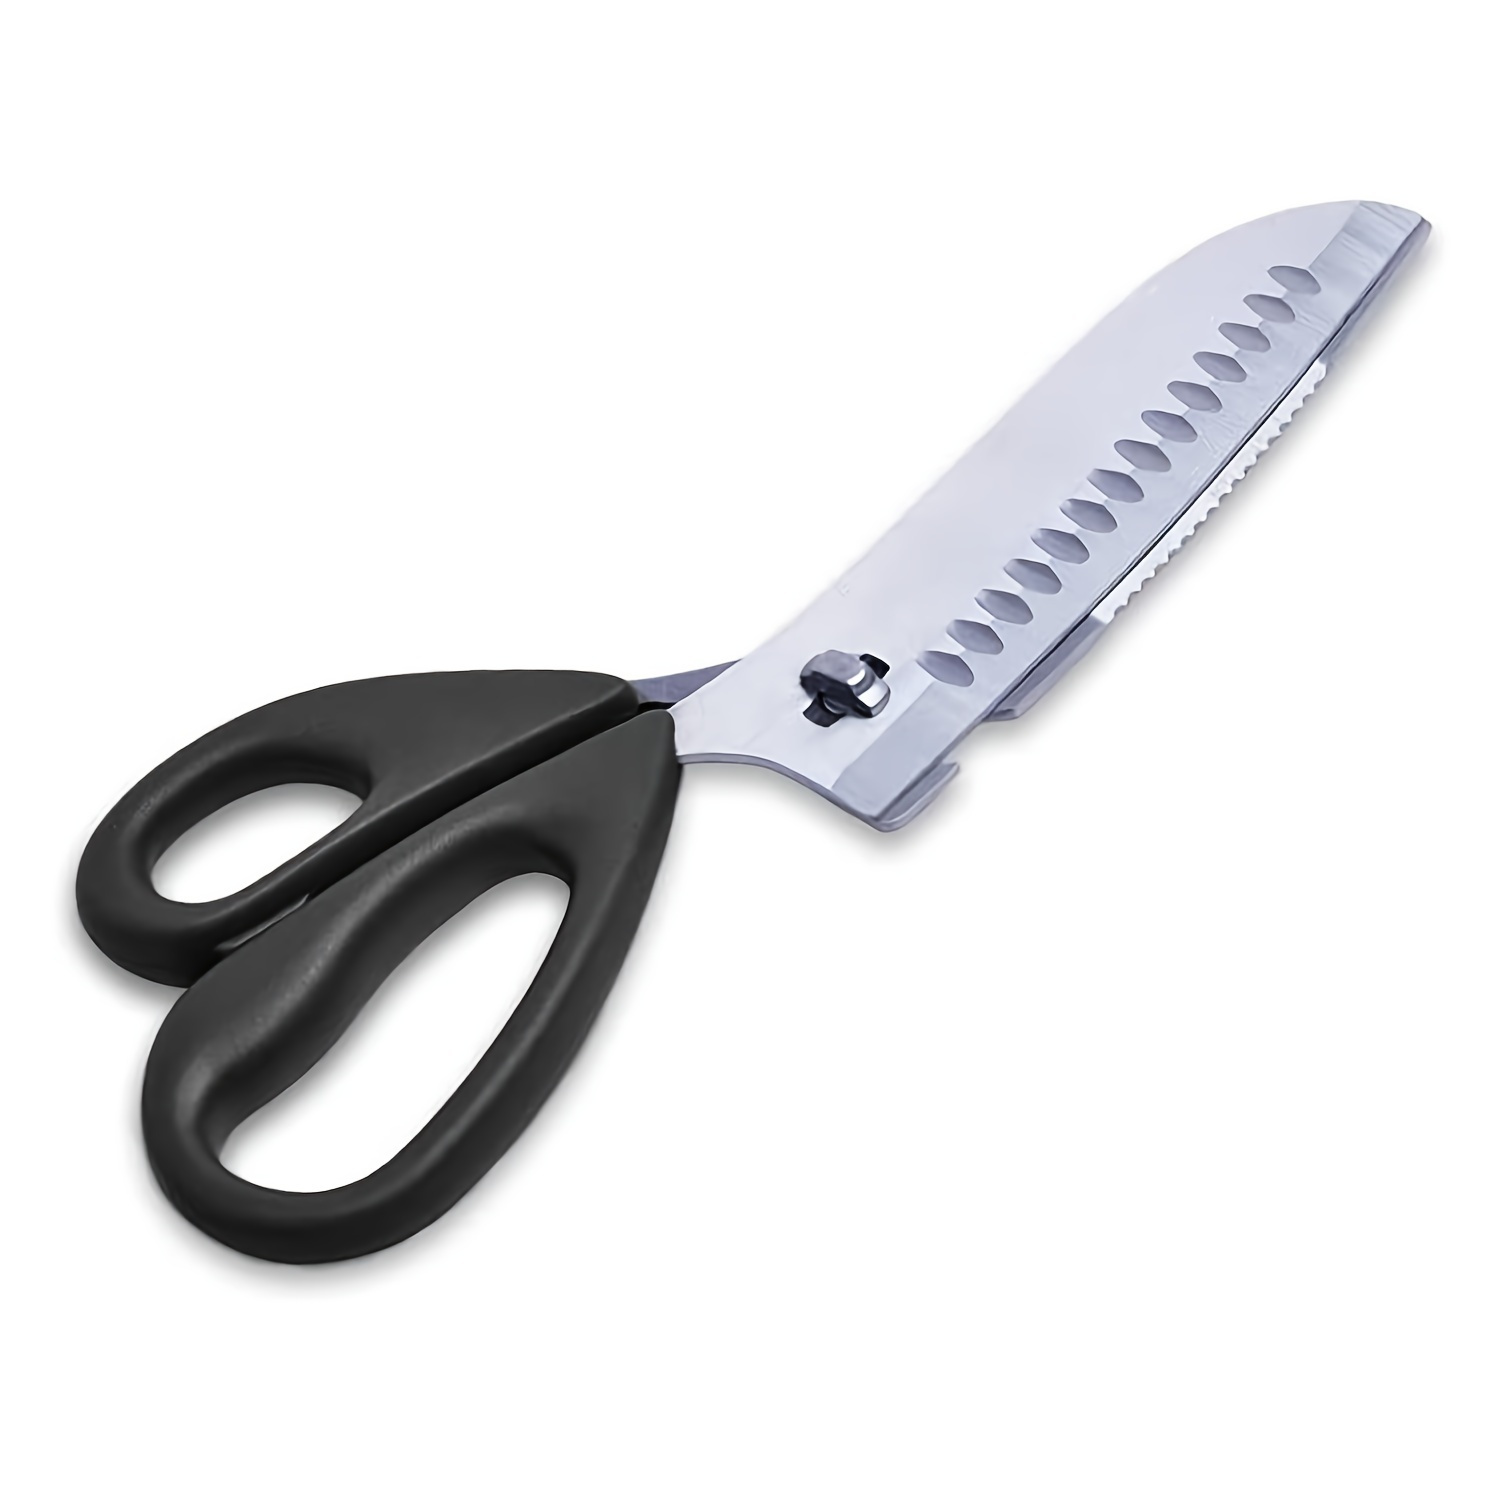 One Simply Terrific Thing: Wüsthof Kitchen Shears